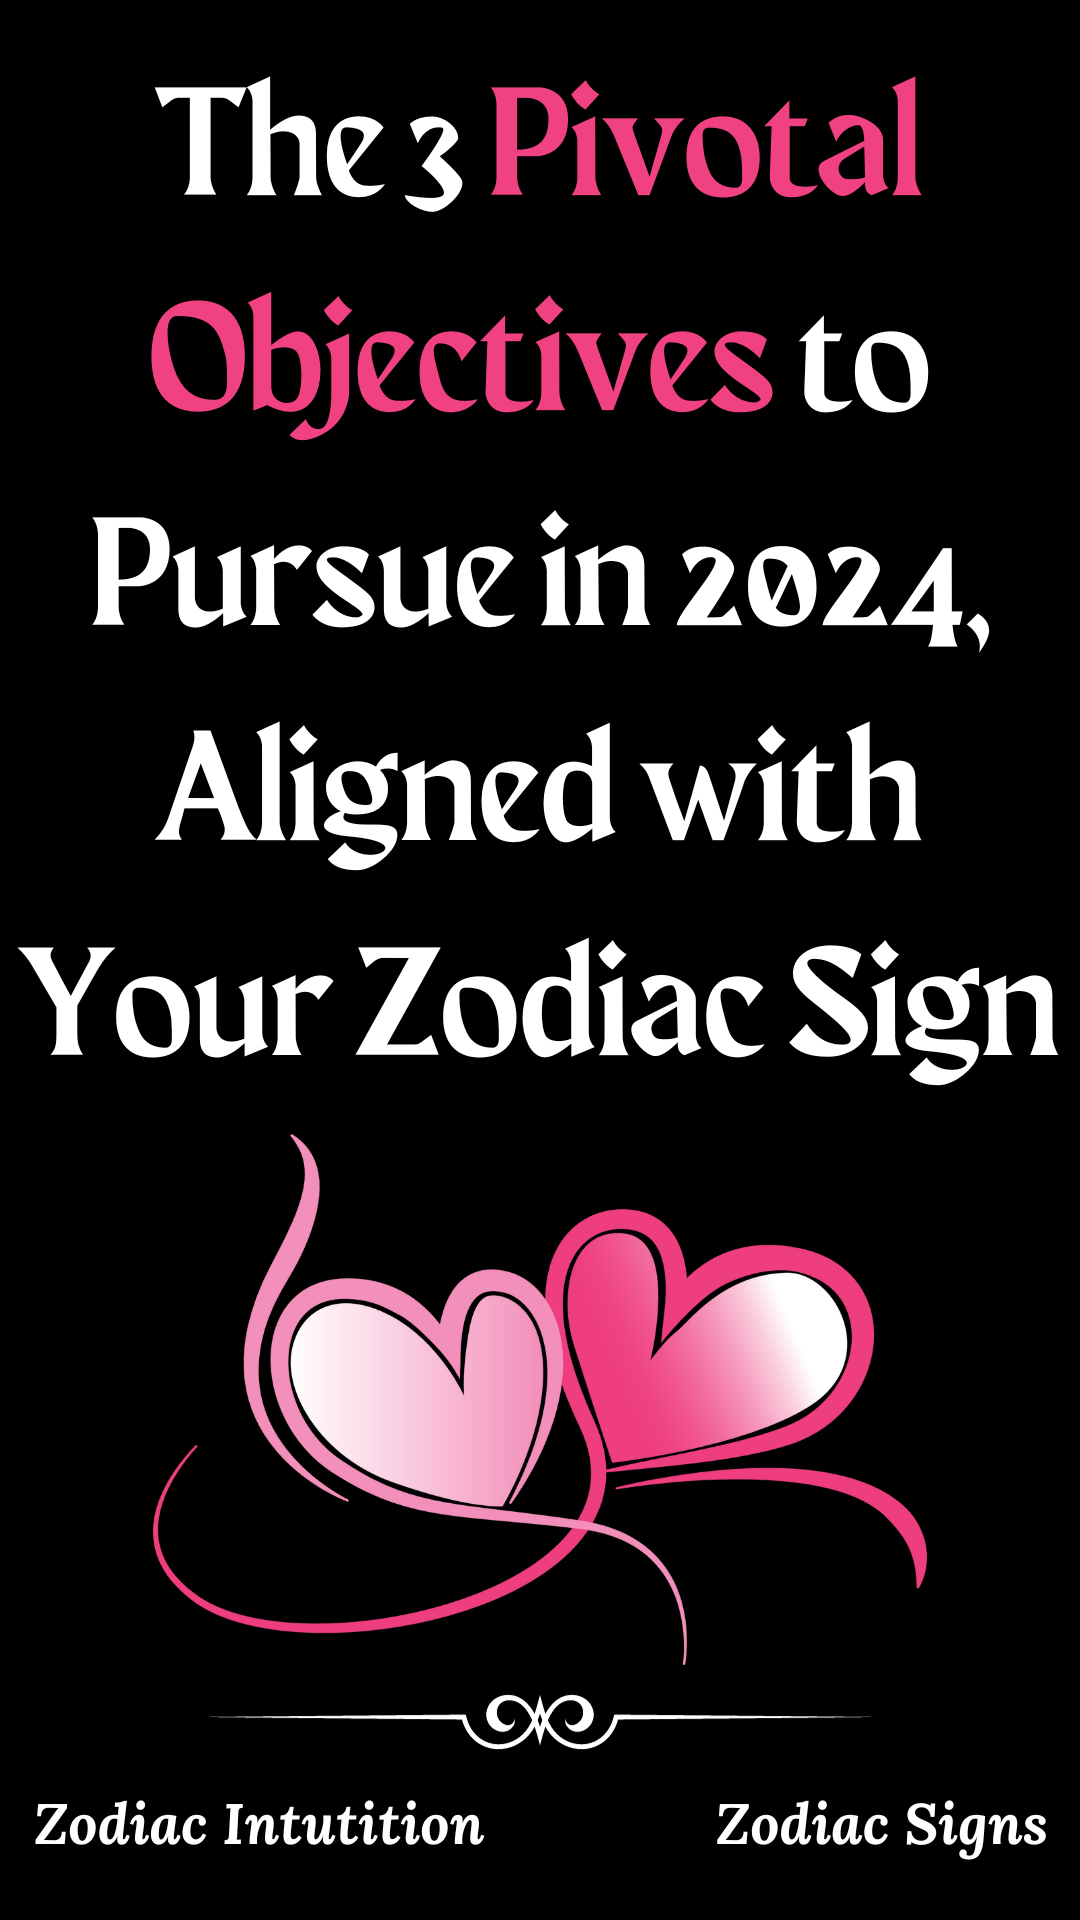 The 3 Pivotal Objectives to Pursue in 2024, Aligned with Your Zodiac Sign